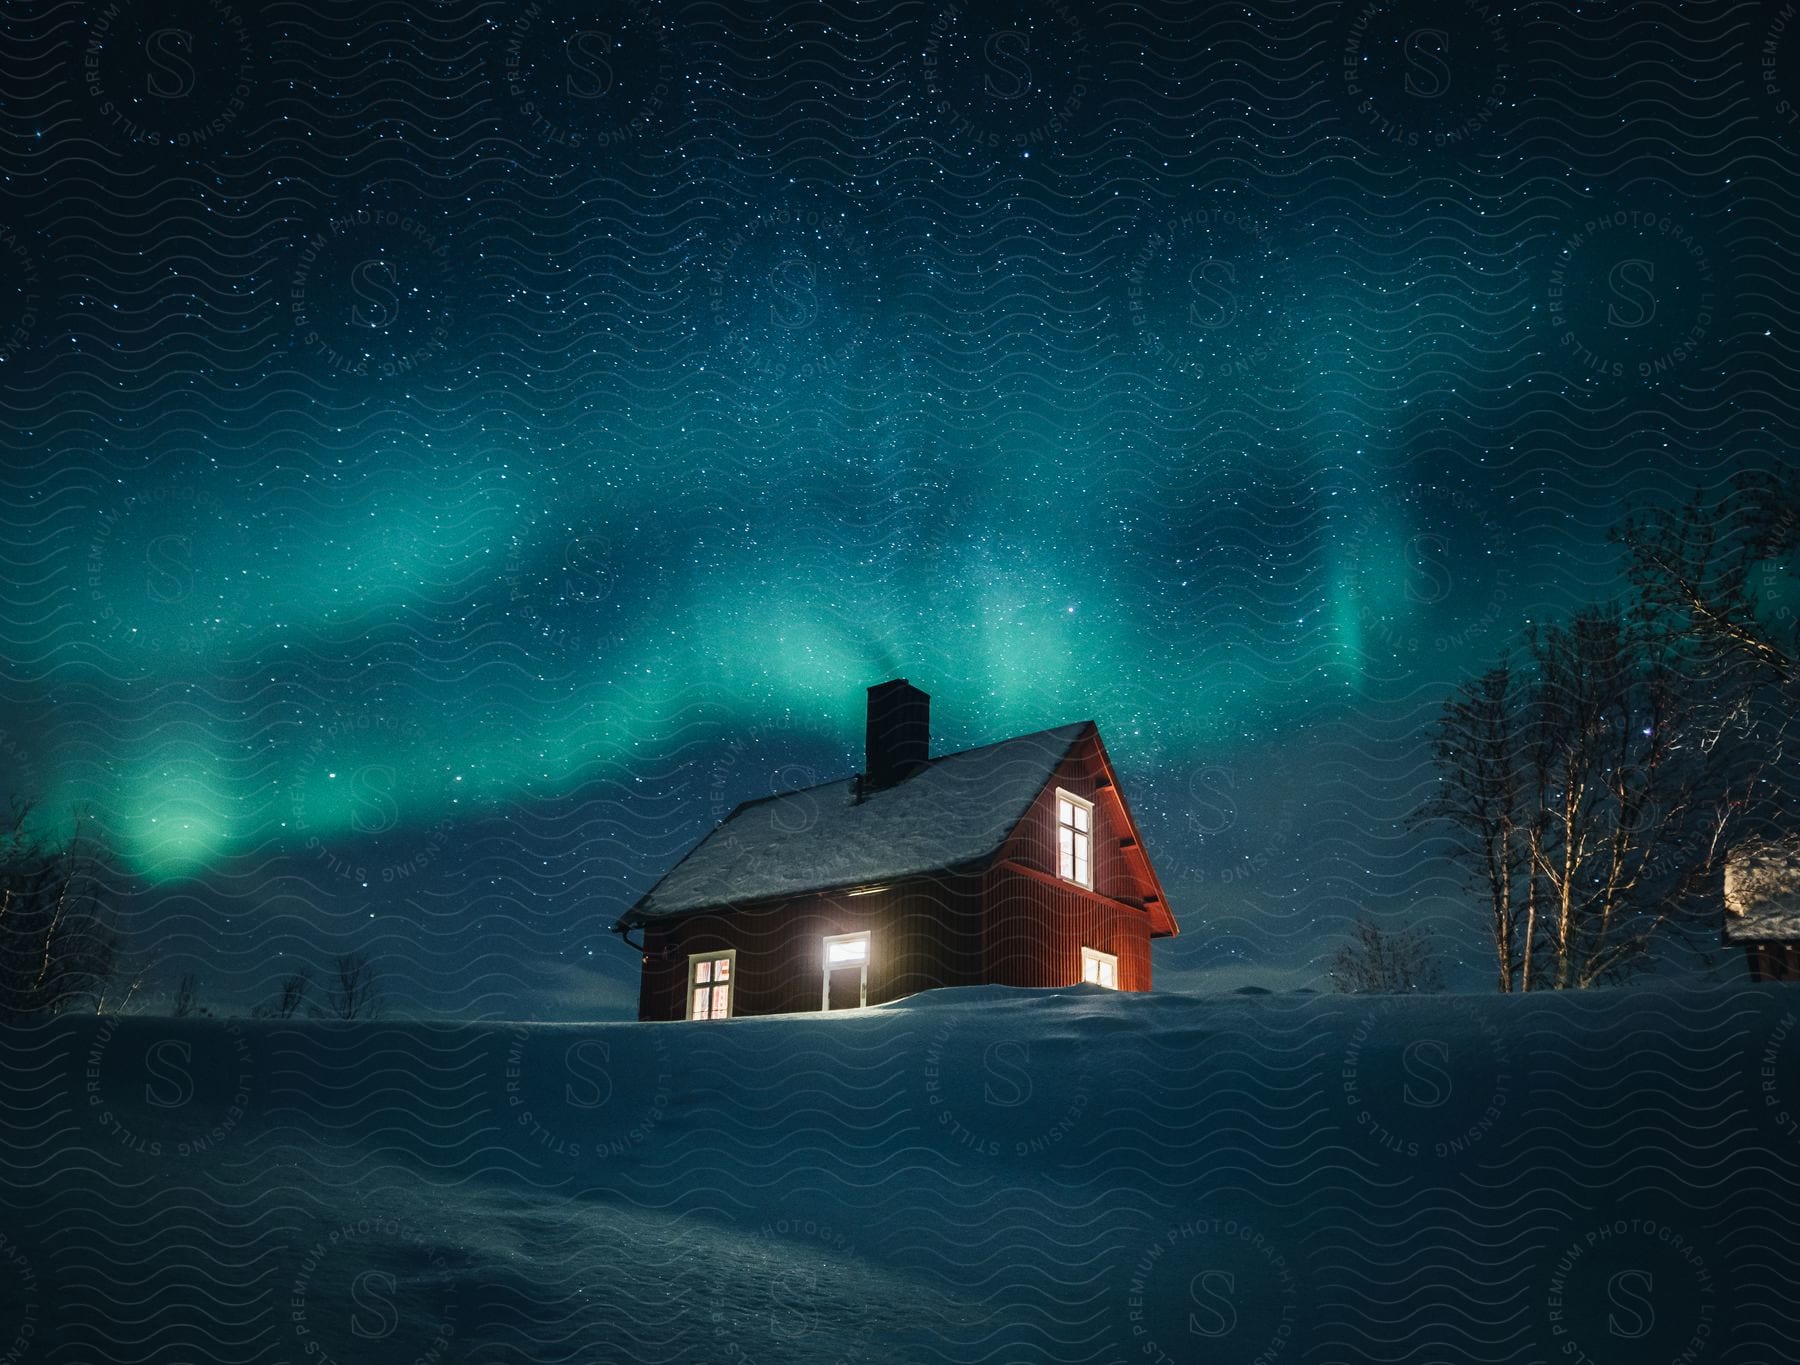 A house stands on snowcovered land with lights on under the glowing aurora borealis in the starry night sky